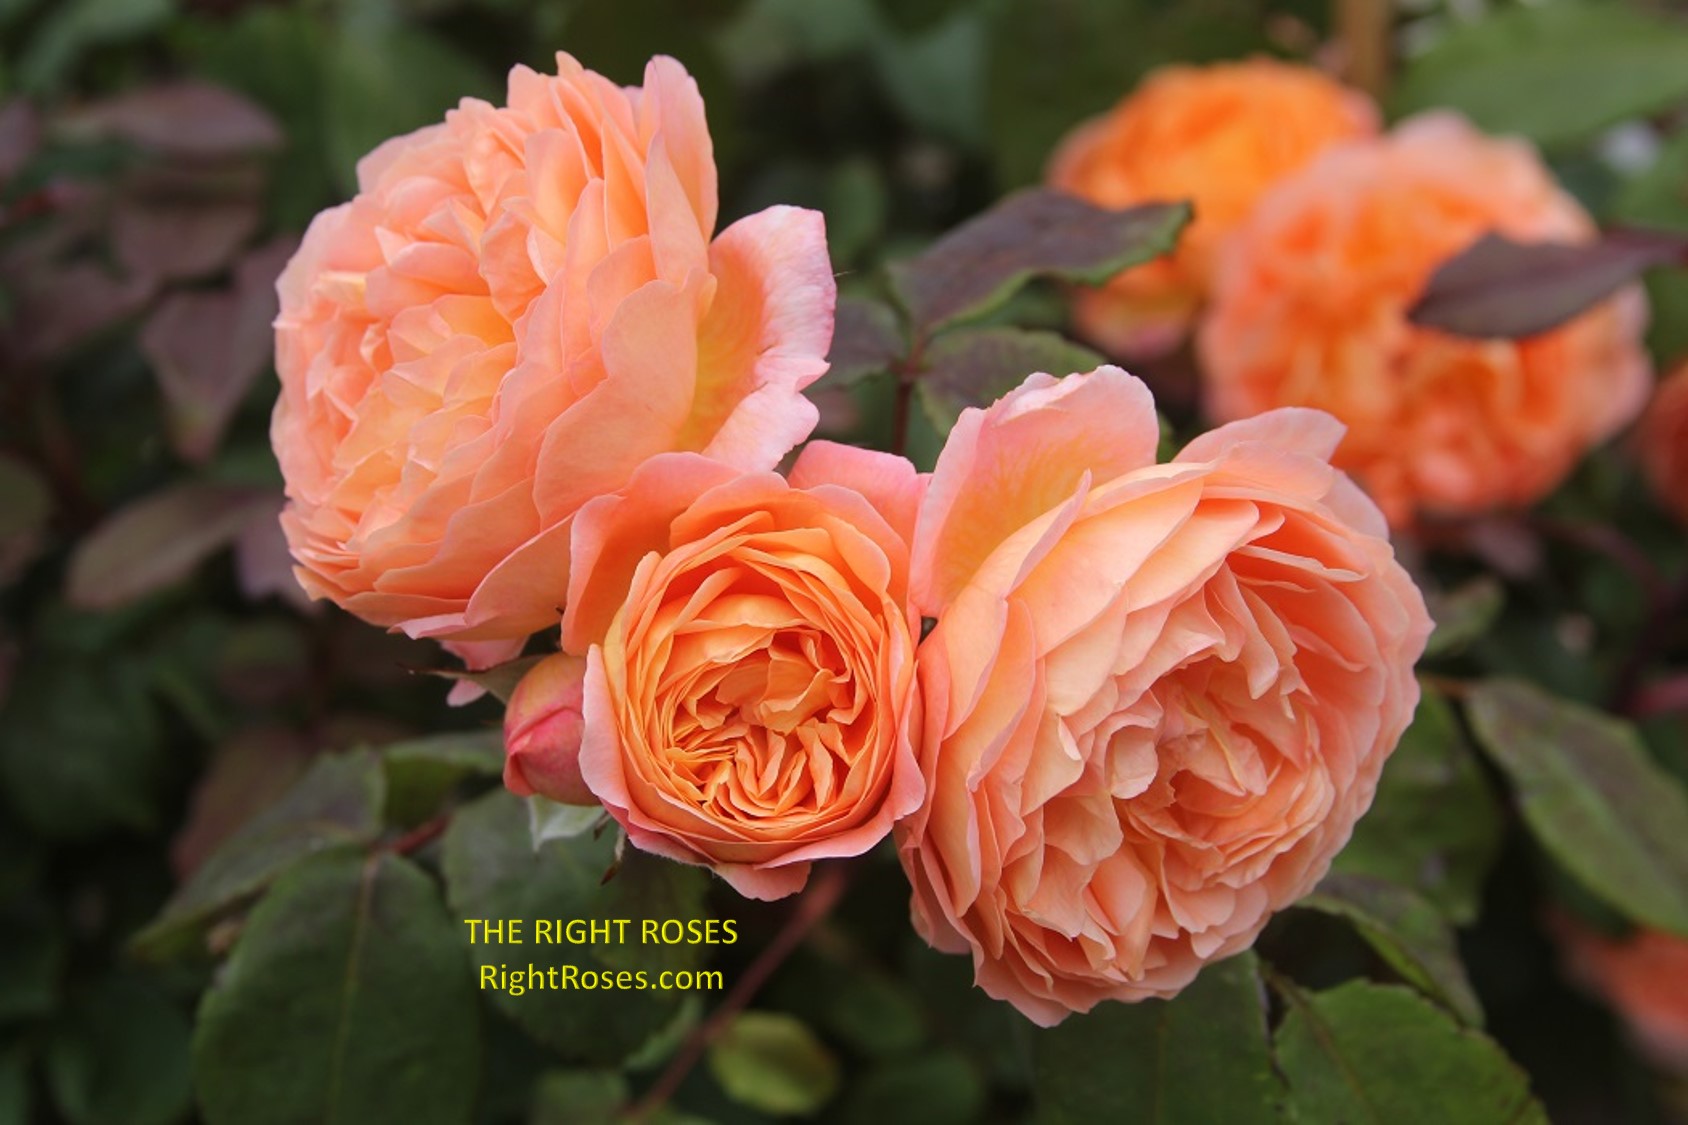 lady emma hamilton rose review the right roses score best top garden store david austin english roses rose products rose rating the right leap rose food fertilizer